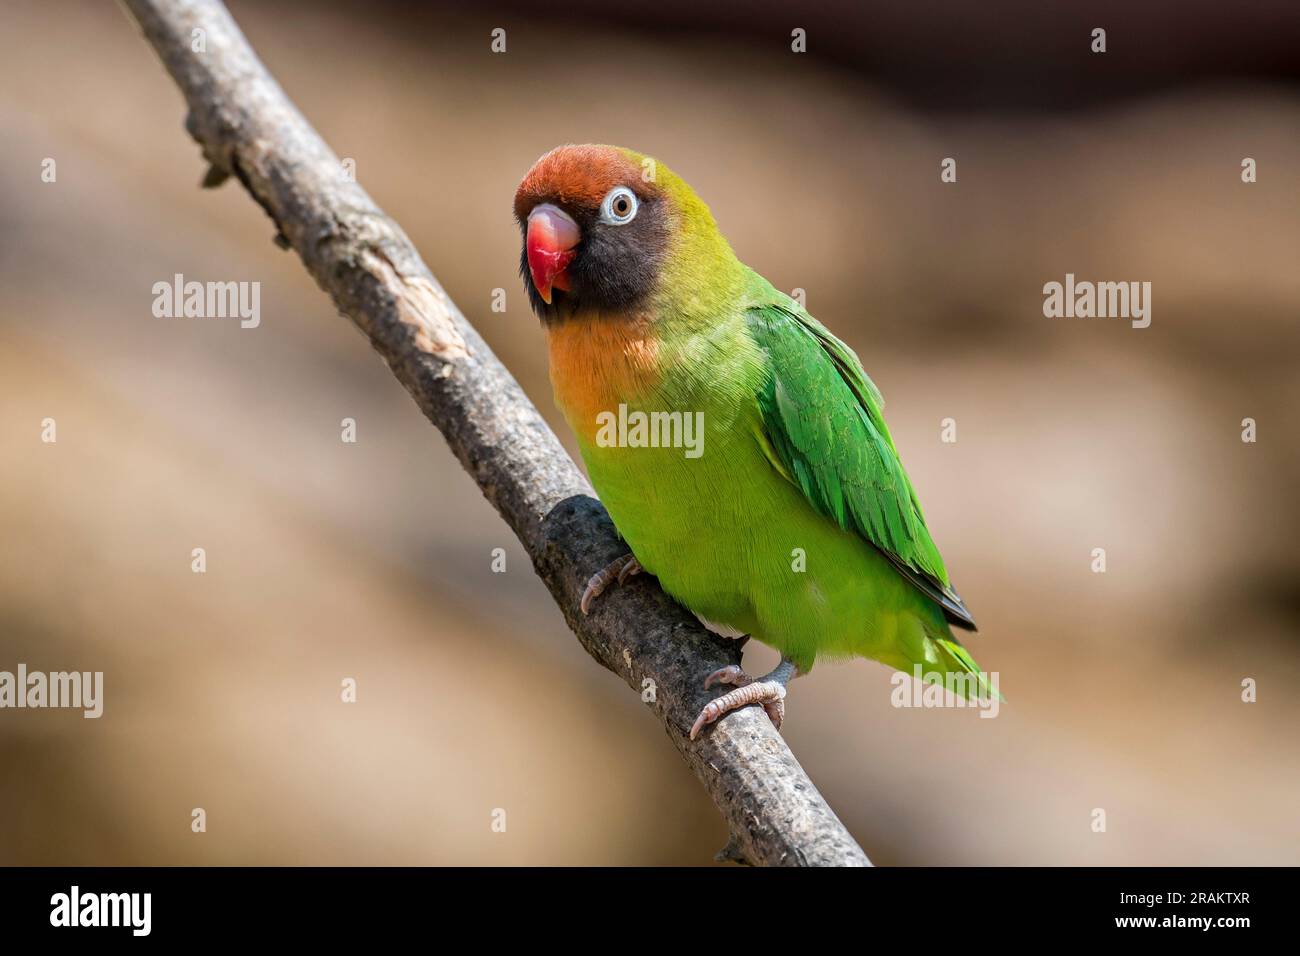 Black-cheeked lovebird (Agapornis nigrigenis), small African parrot species endemic to southwest Zambia, Africa Stock Photo